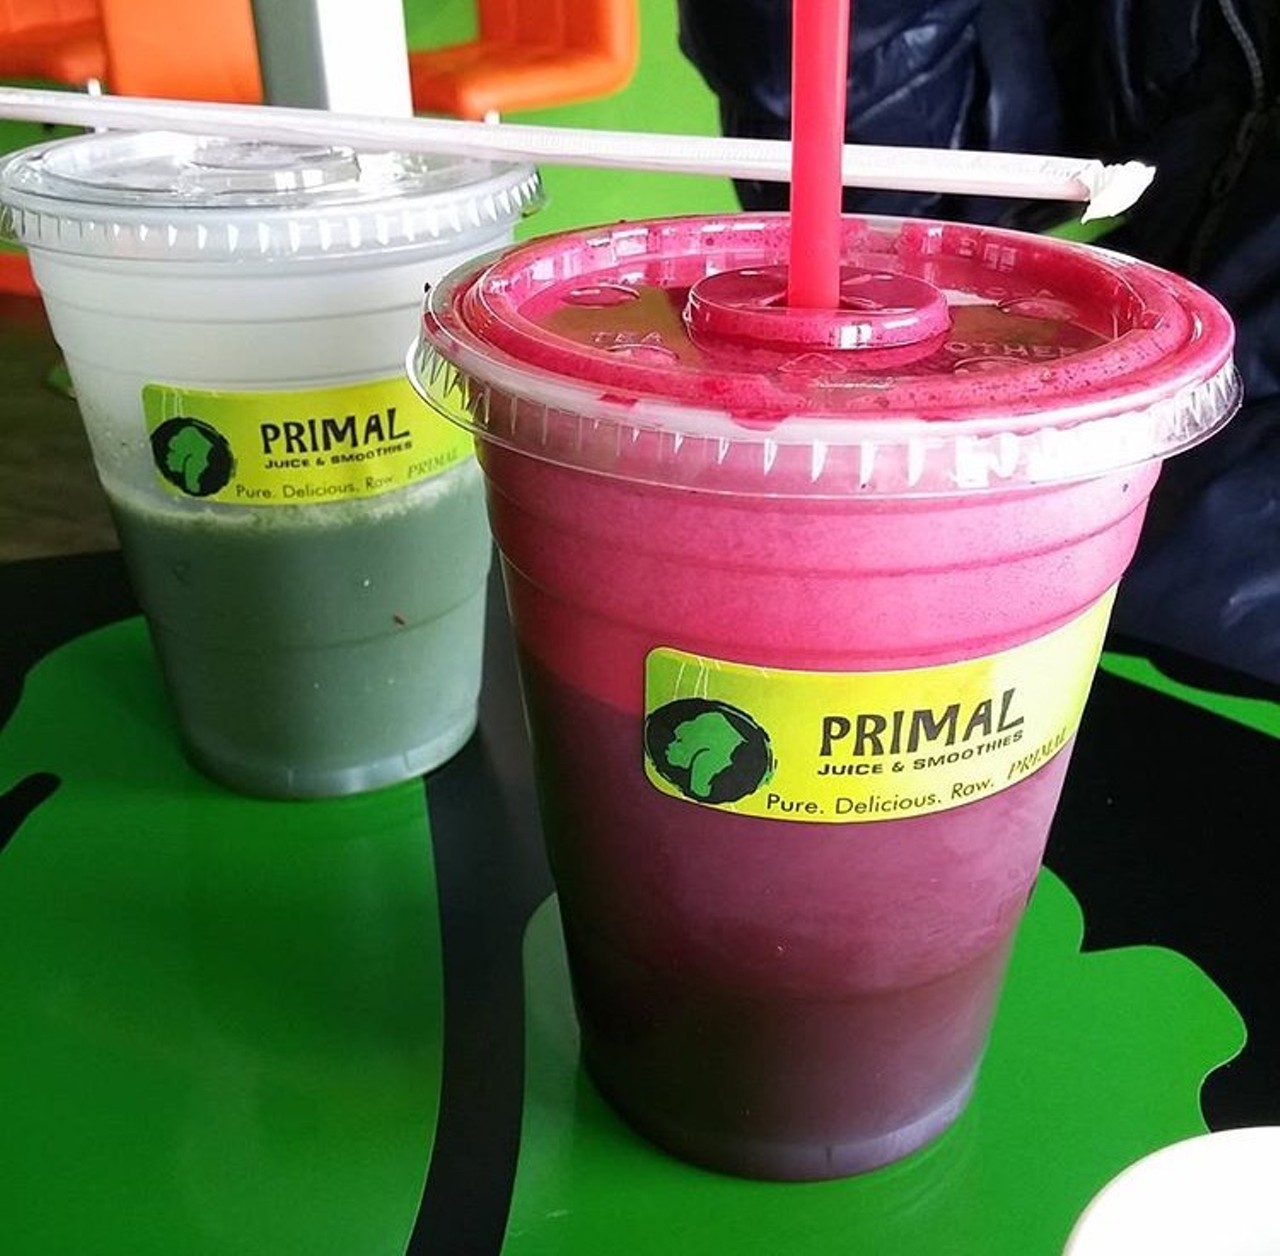 Primal Juice and Smoothies
9703 Bandera Rd #106, (210) 803-0710, primaljuiceandsmoothies.com/ 
Juice lovers can receive up to 58% off on their favorite fruit mixes with a variety of Groupon vouchers.
Photo via Instagram / saladsally